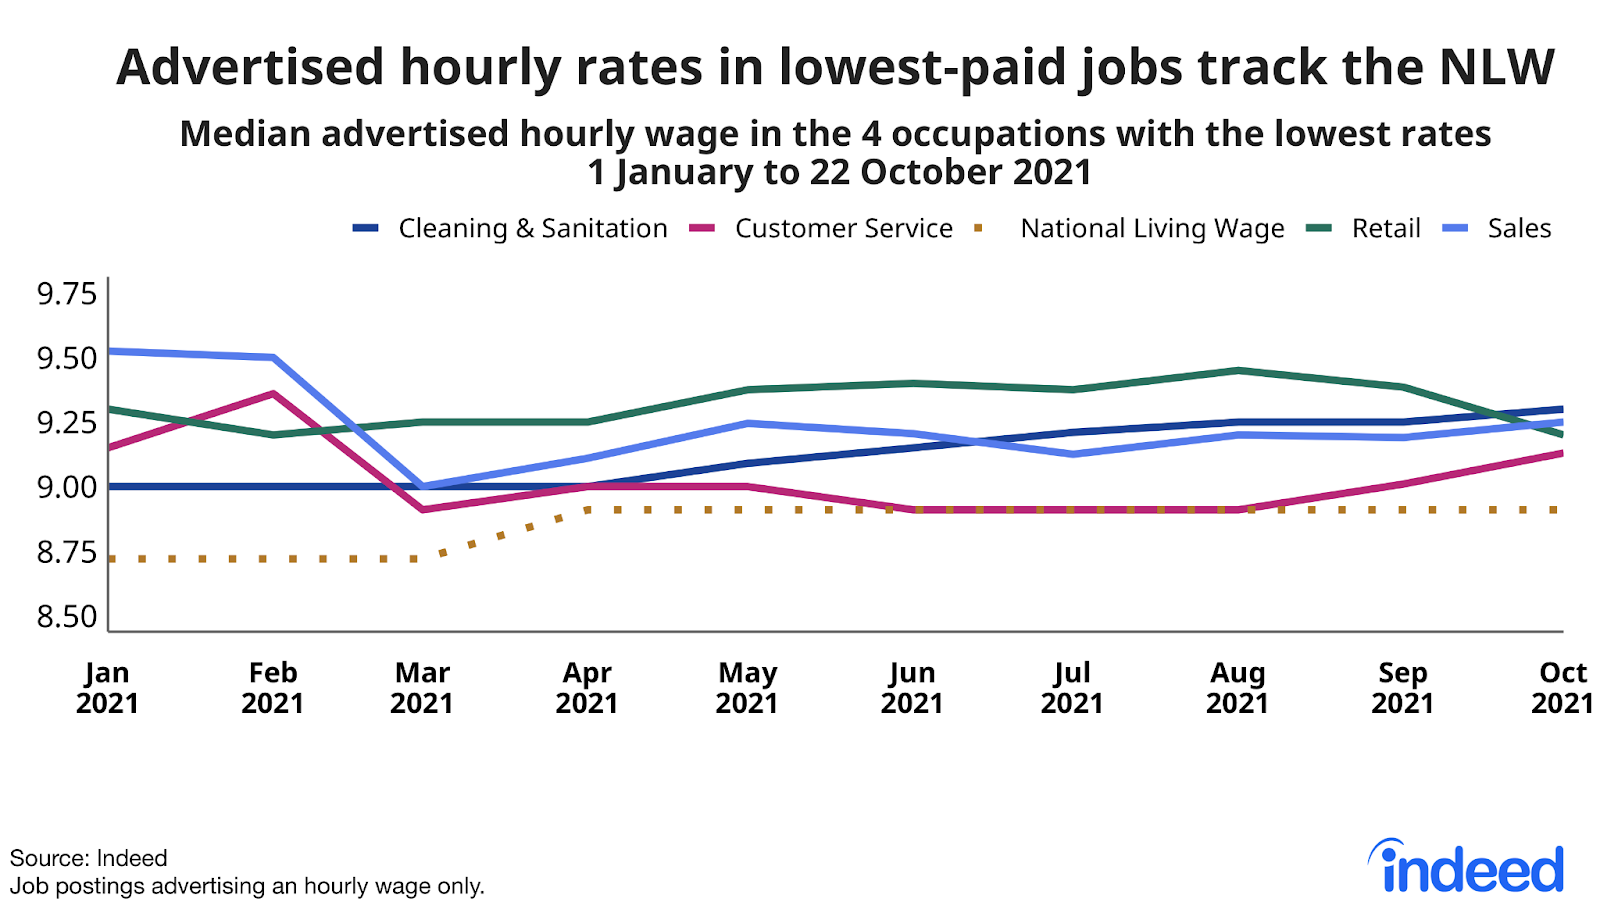 Chart titled “Advertised hourly rates in lowest-paid jobs track the NLW” 